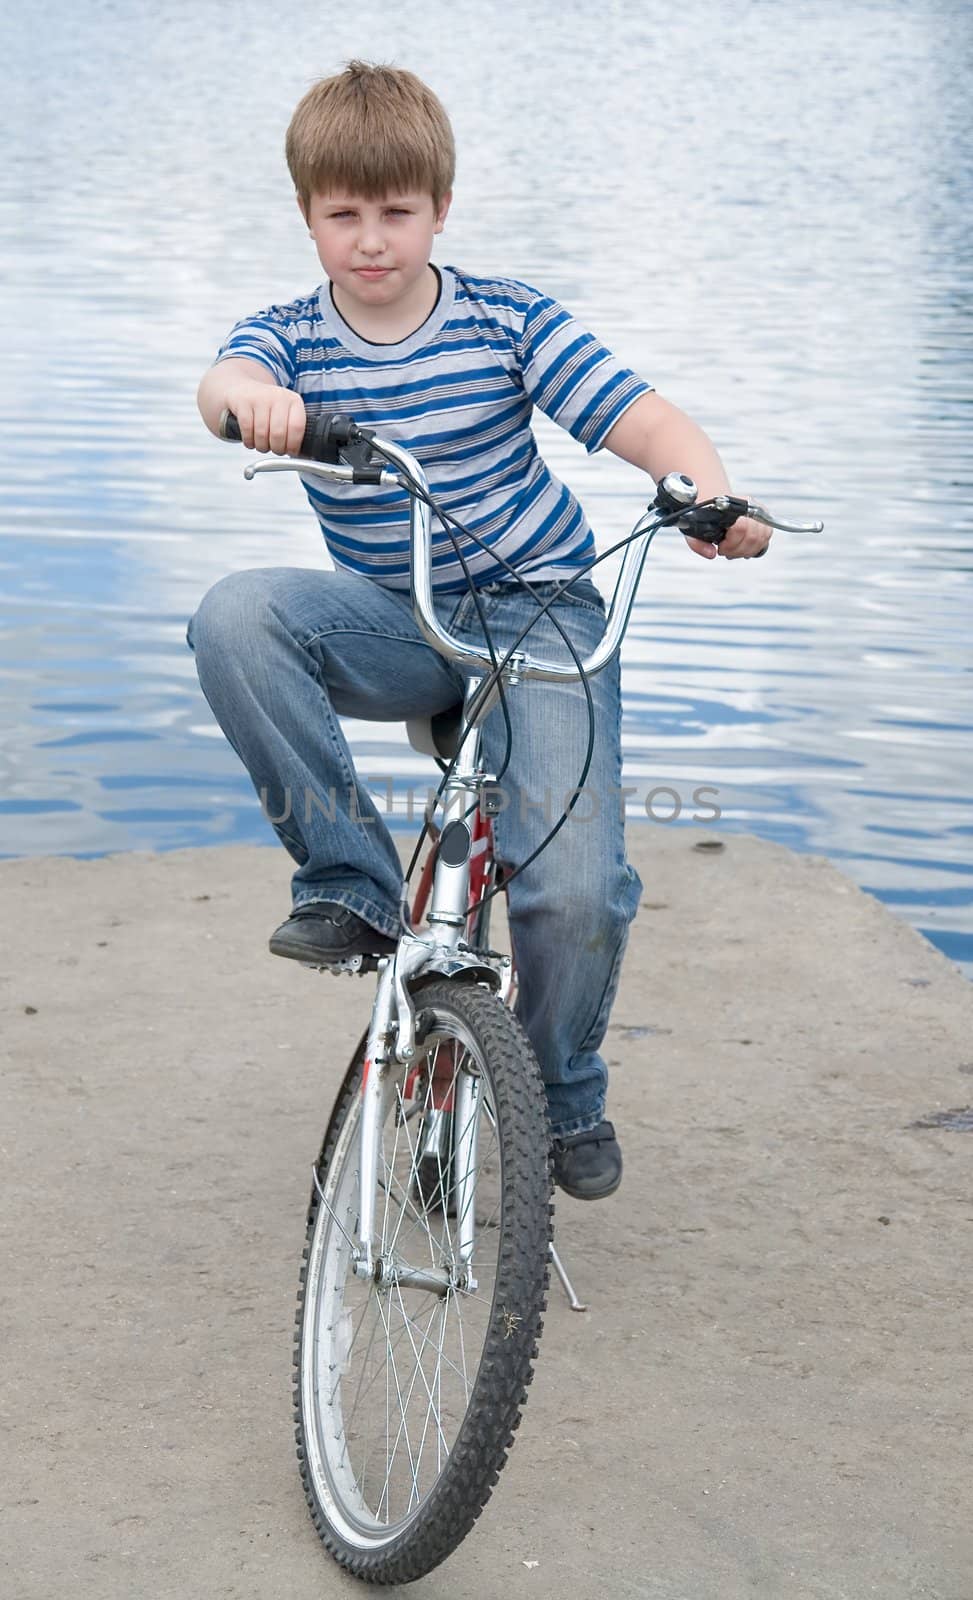 Boy on a bicycle with river at background